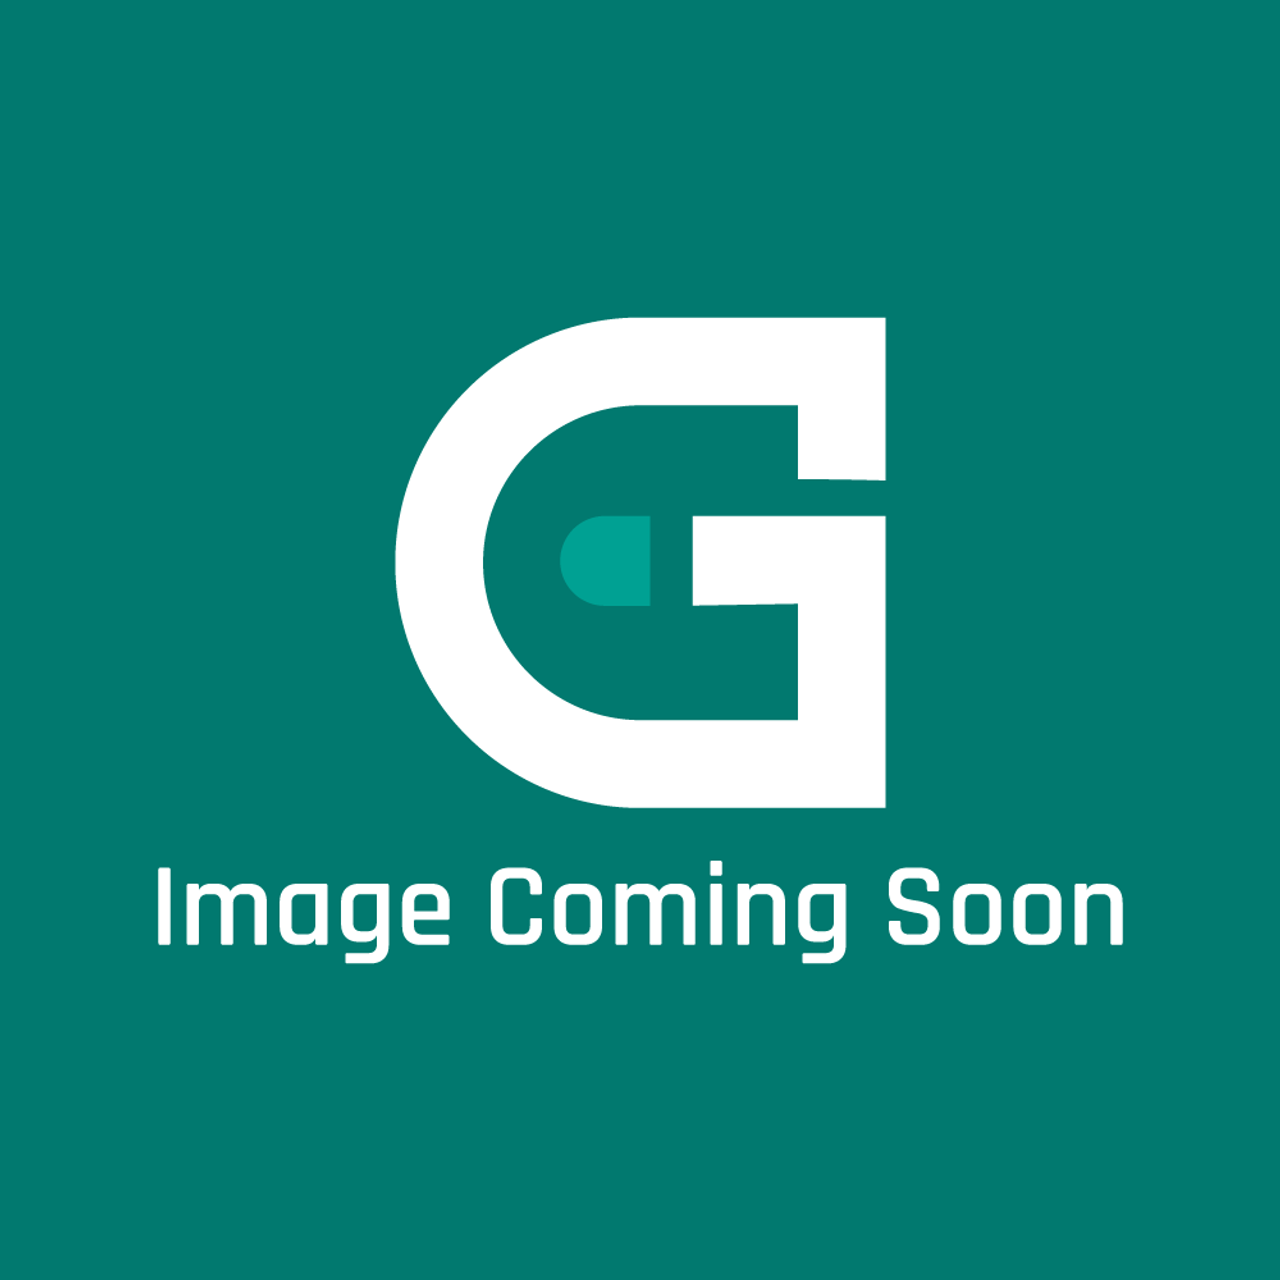 Frigidaire - Electrolux 316605362 Panel - Image Coming Soon!